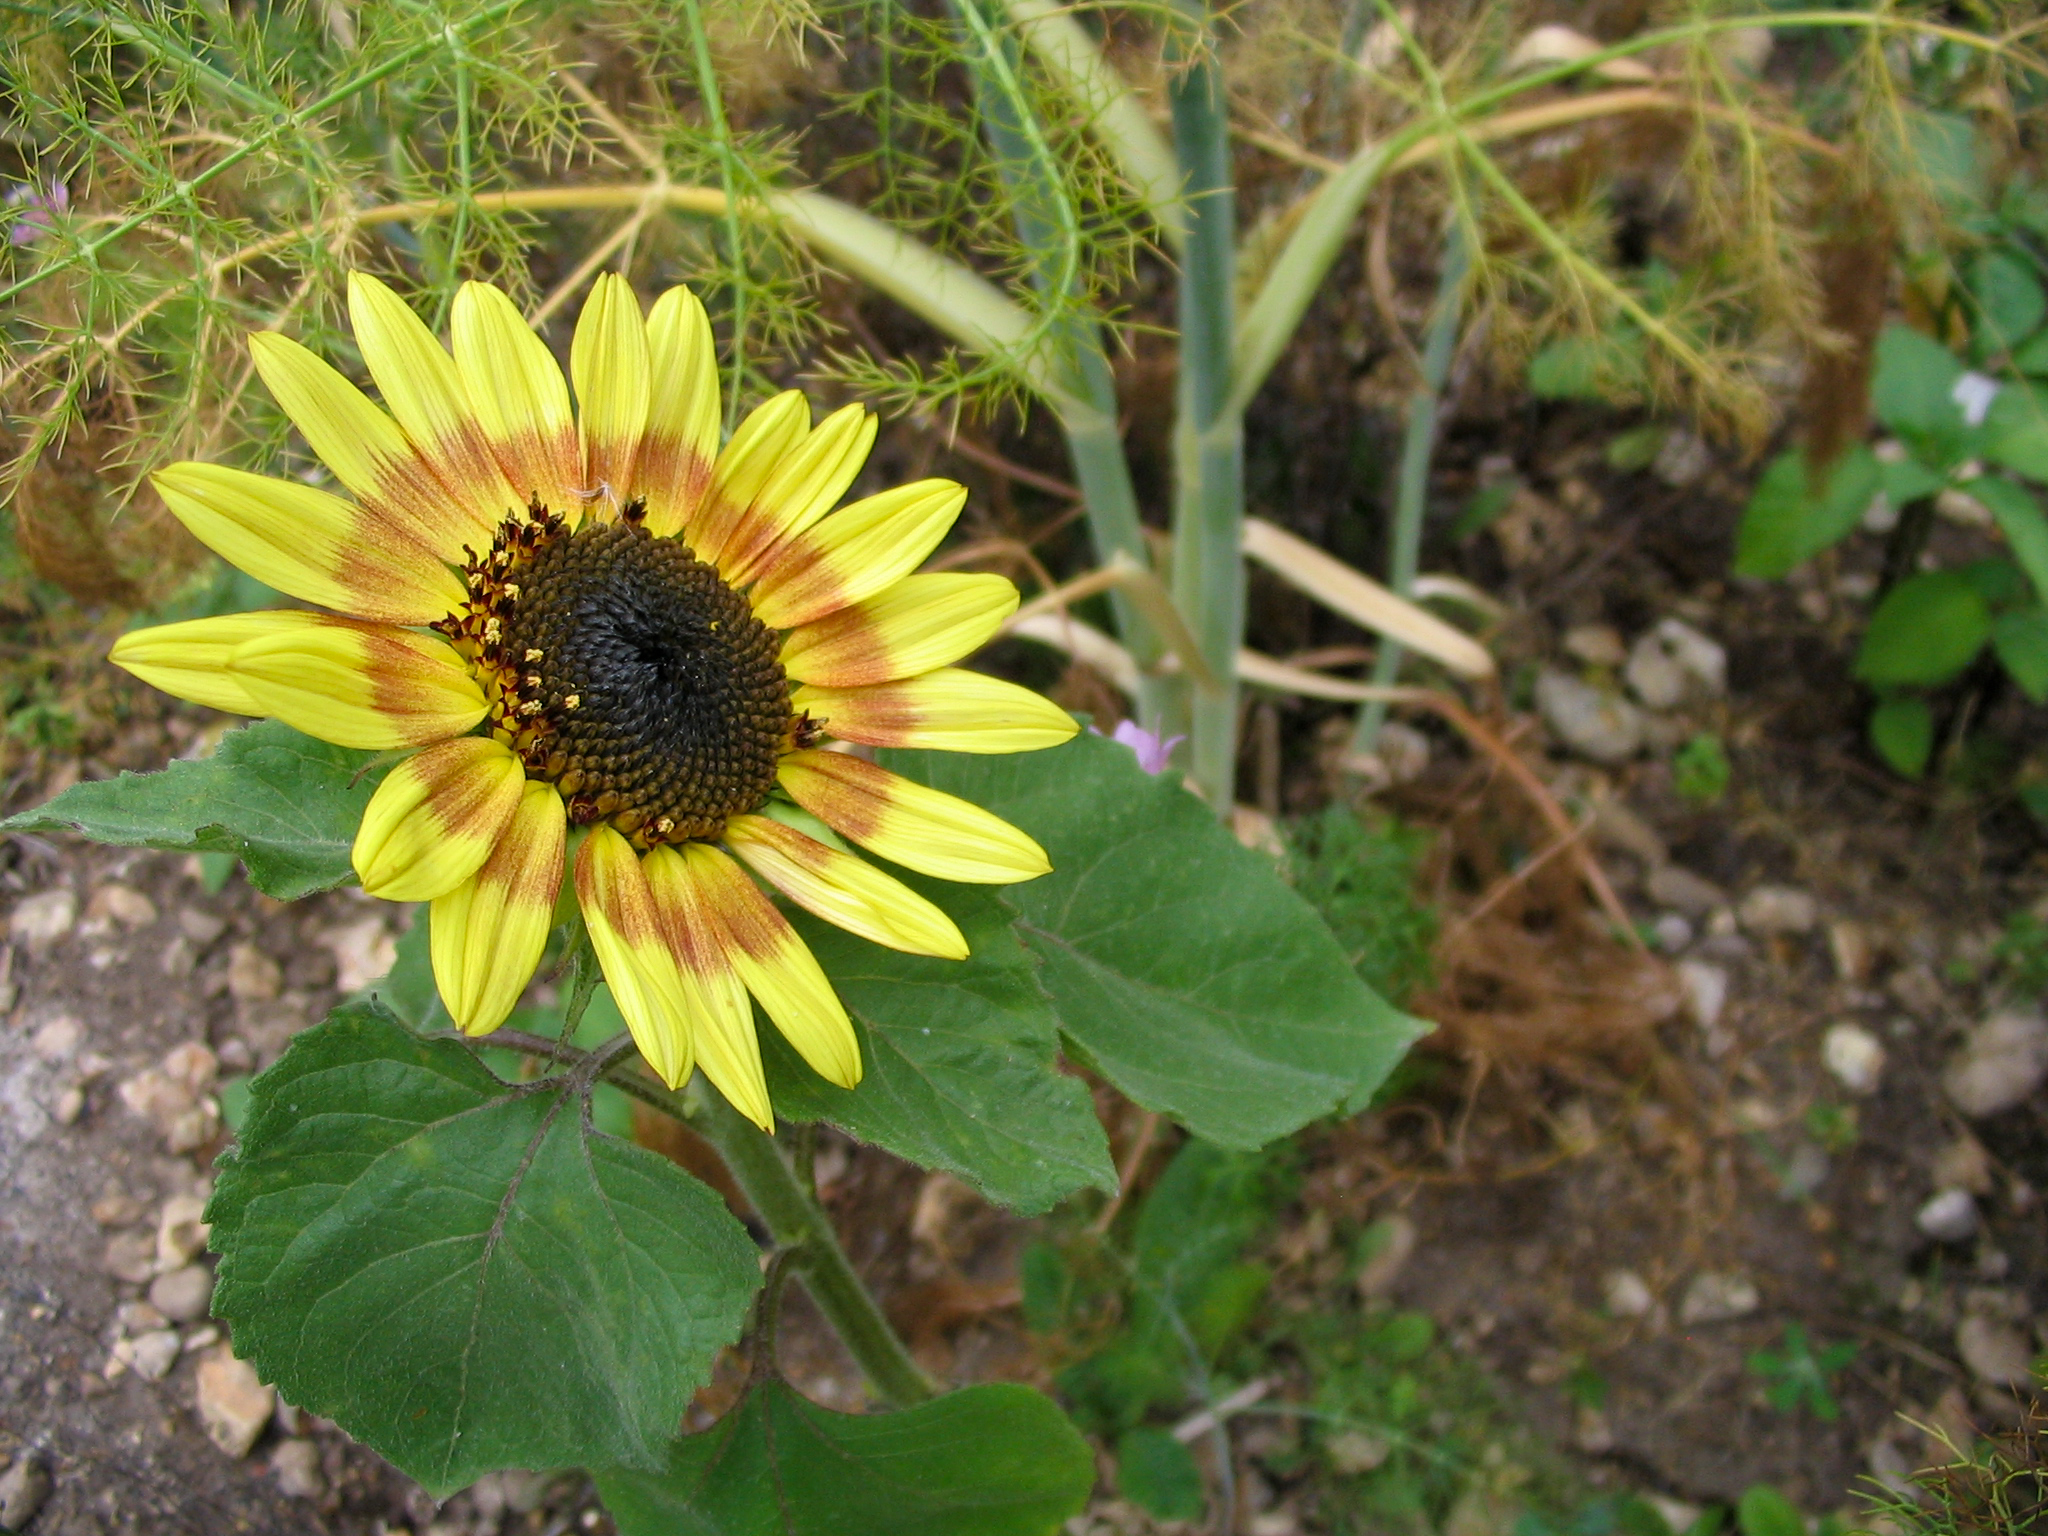 a large flower with yellow petals blooming in the sunlight